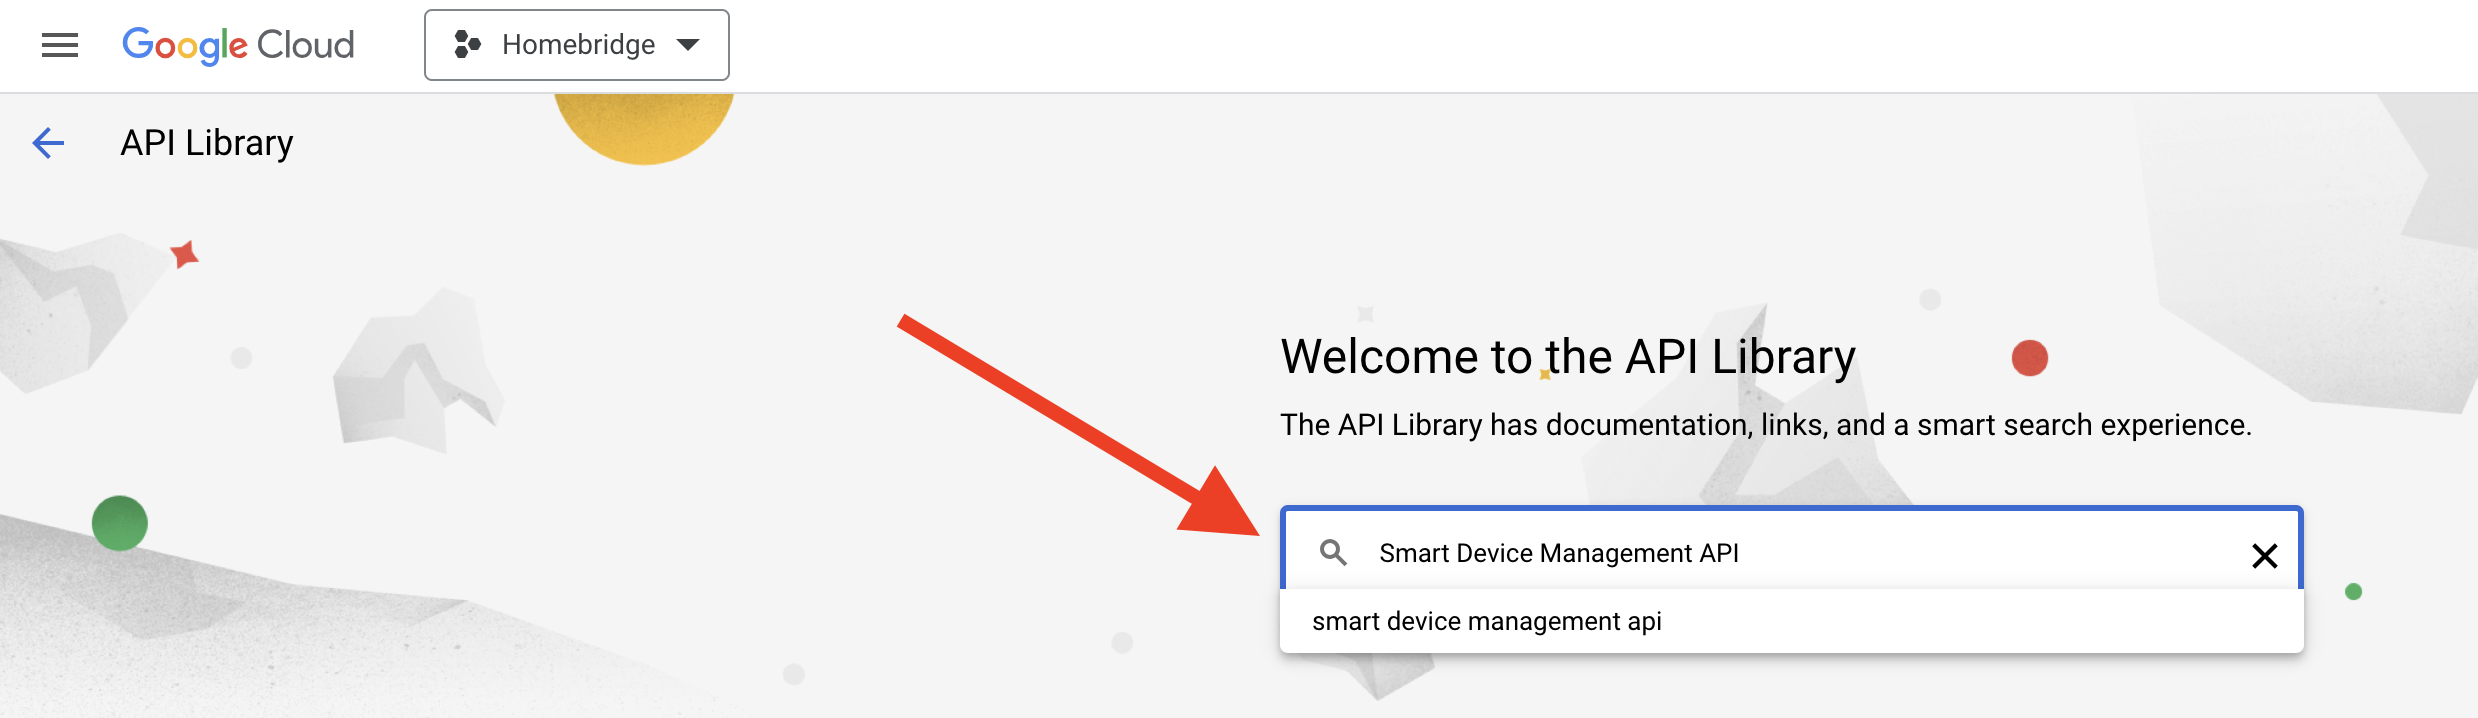 Searching for the Smart Device Management API